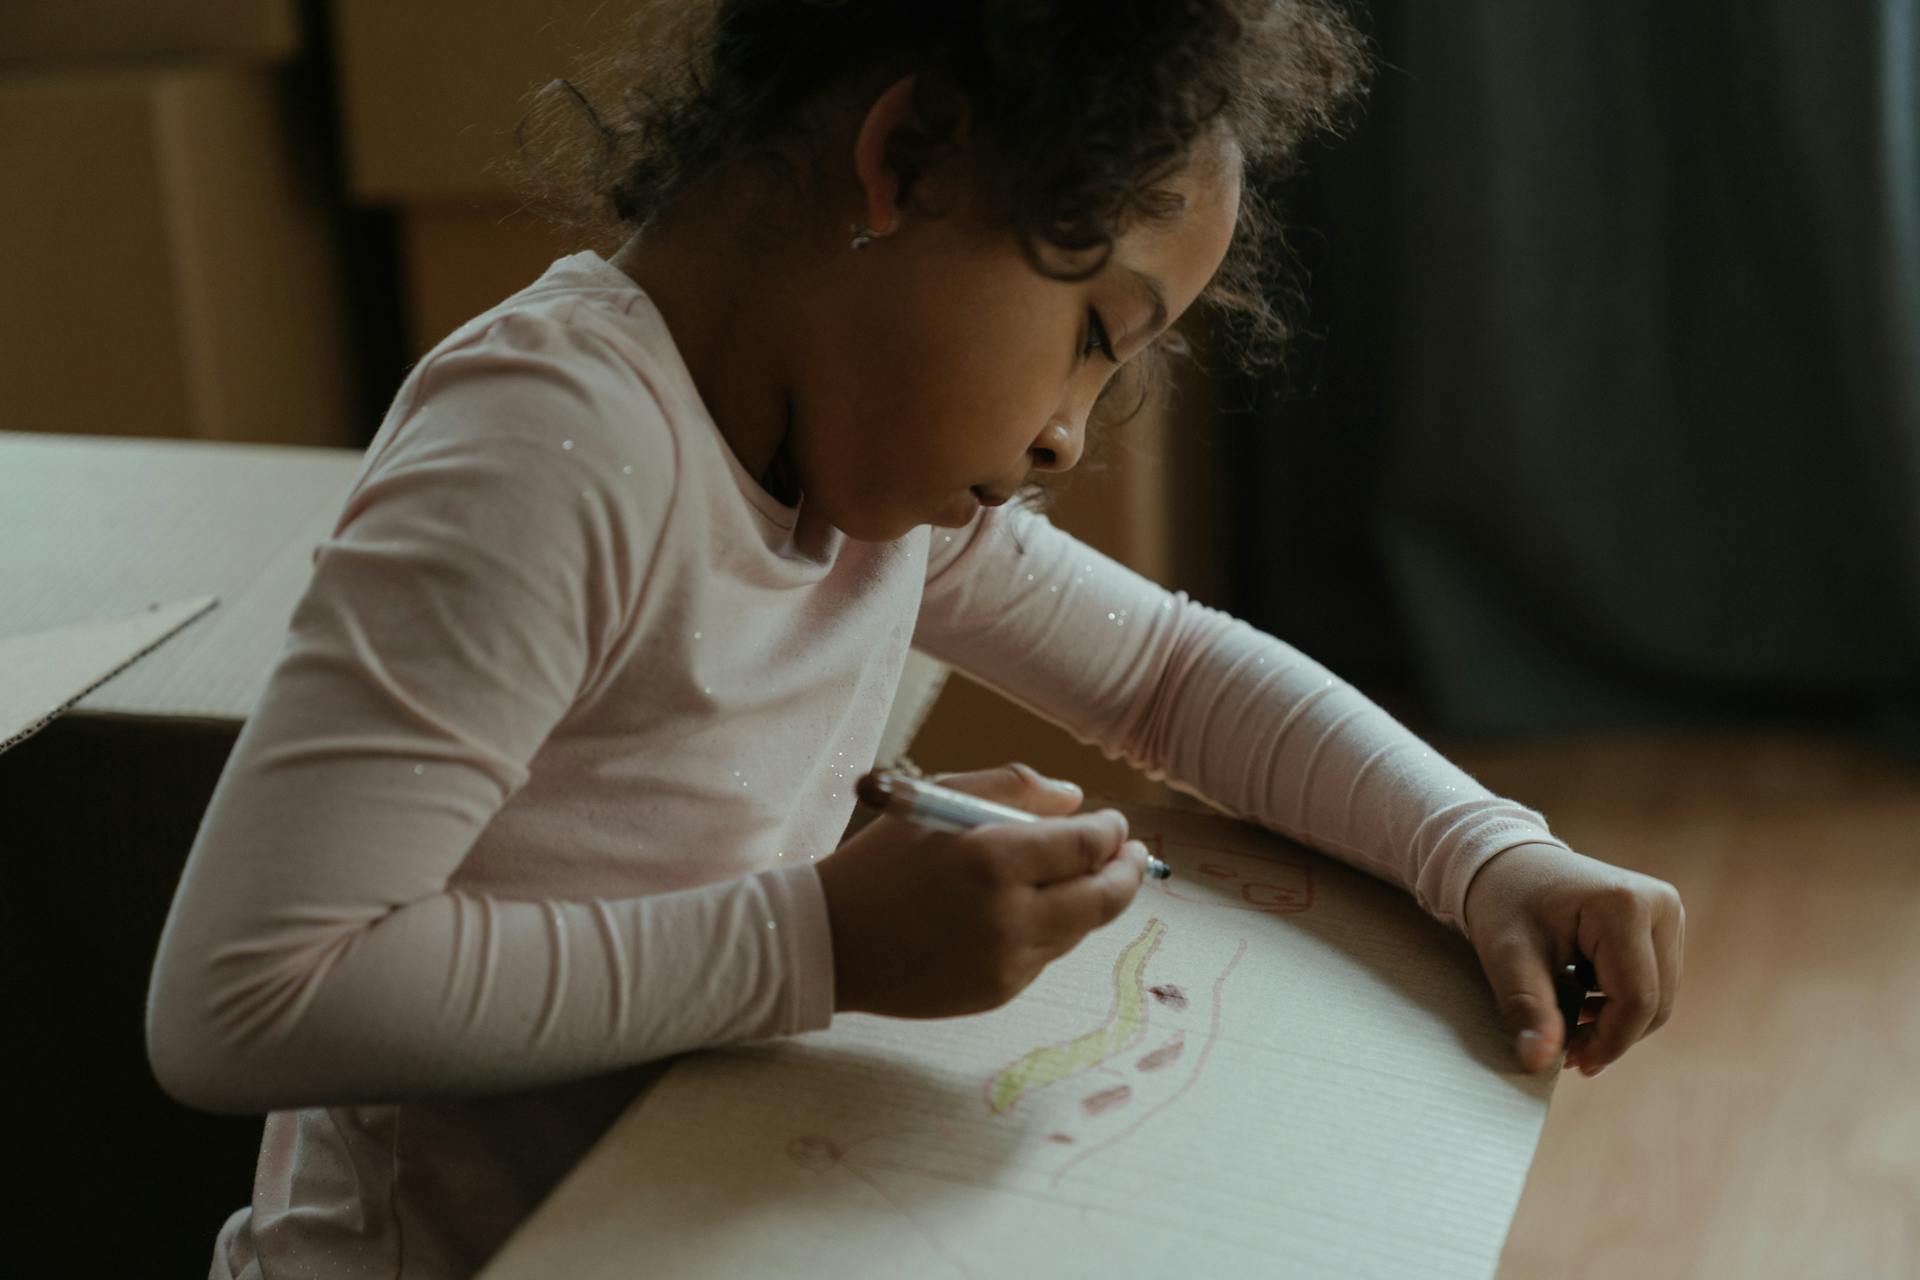 Child drawing on a box | Source: Pexels